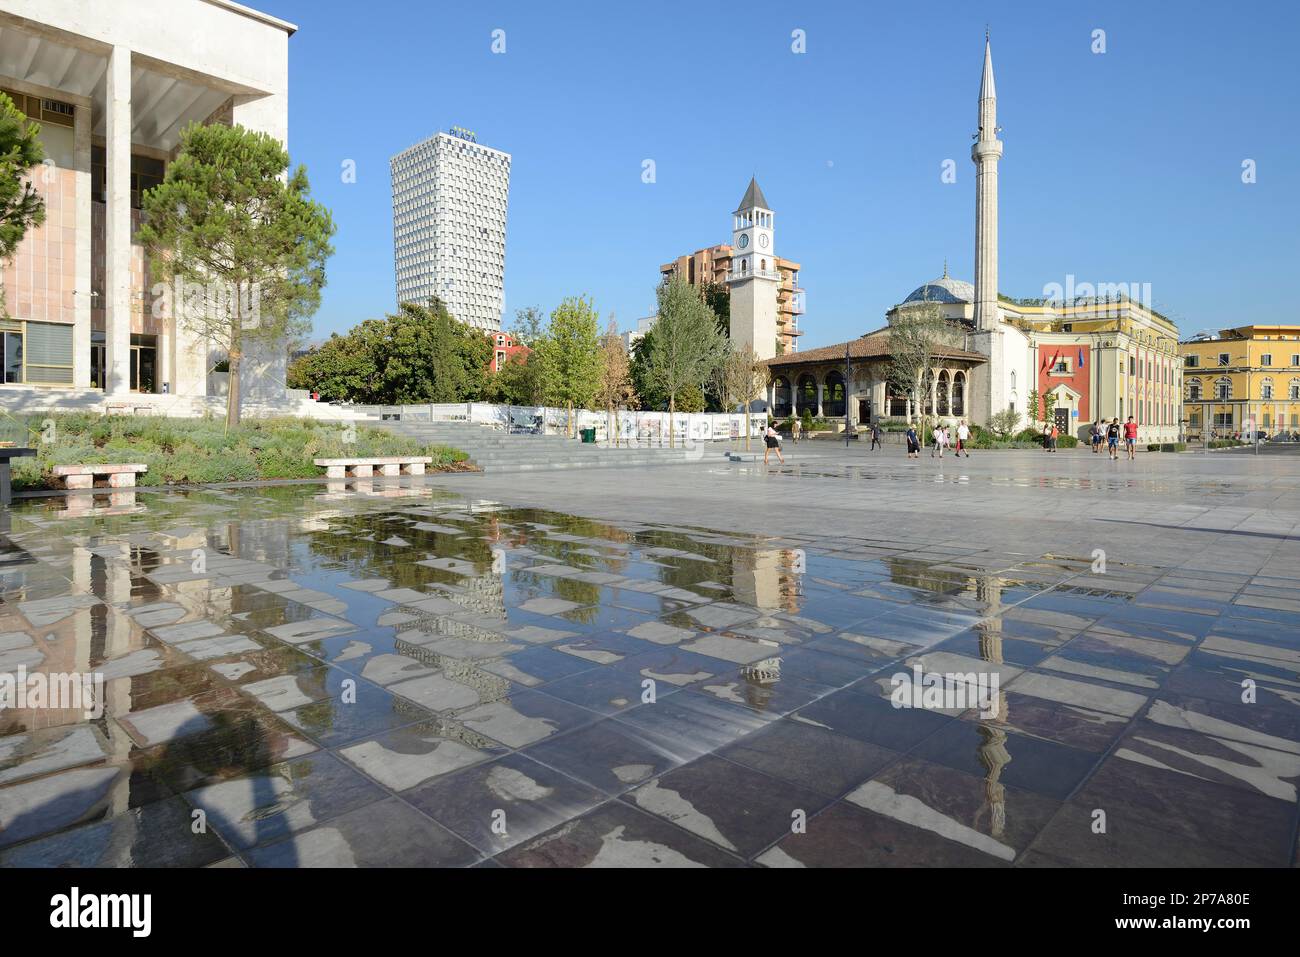 Plaza Hotel, Bell Tower and Ethem Bey Mosque reflected in a puddle, Skanderbeg Square, Tirana, Albania Stock Photo